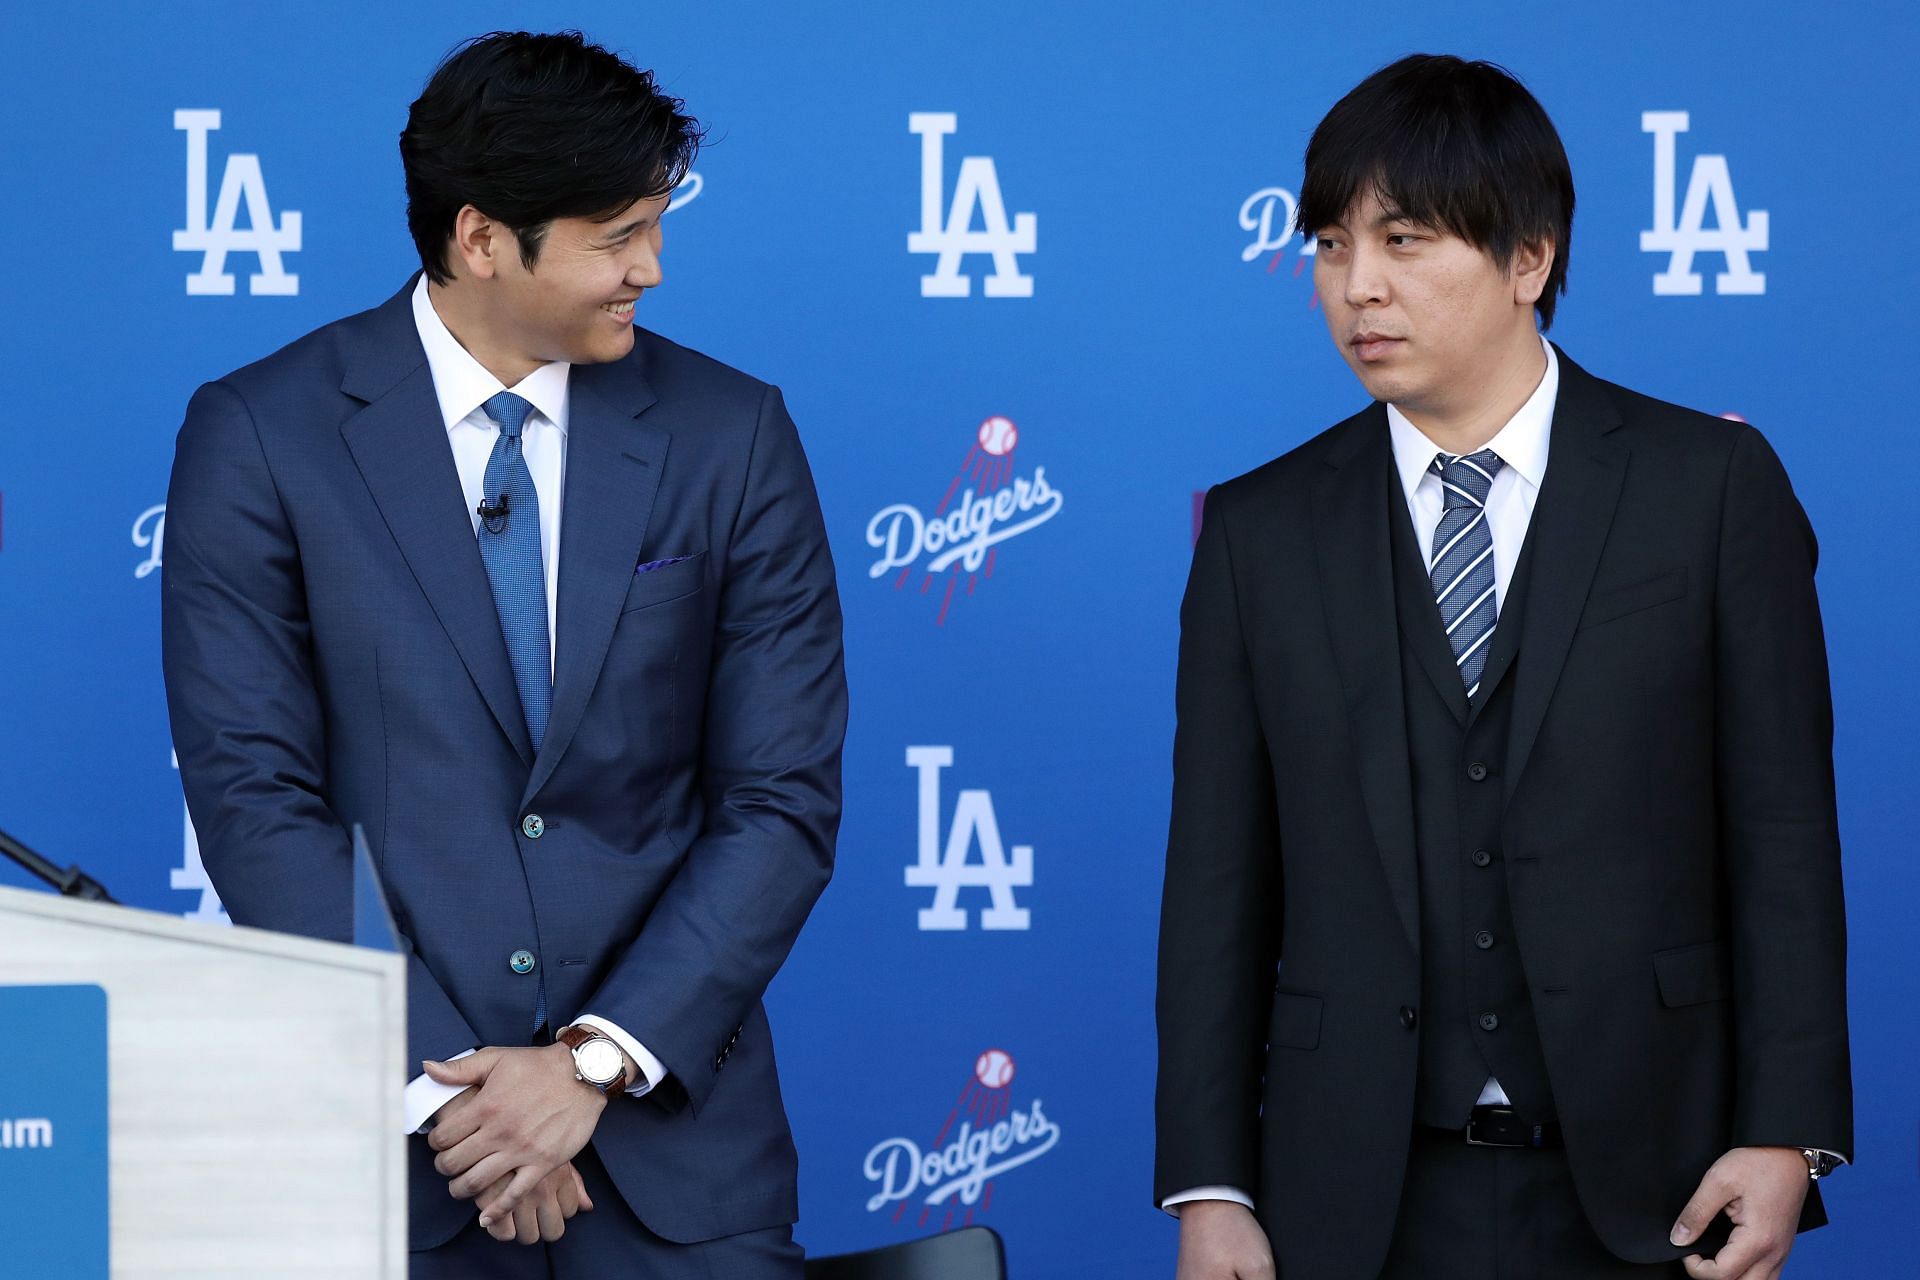 Shohei Ohtani&rsquo;s iterpreter, Ippei Mizuhara, has spoken out about his relationship with Shohei Ohtani and the reason behind the allegations tying him to illegal betting.